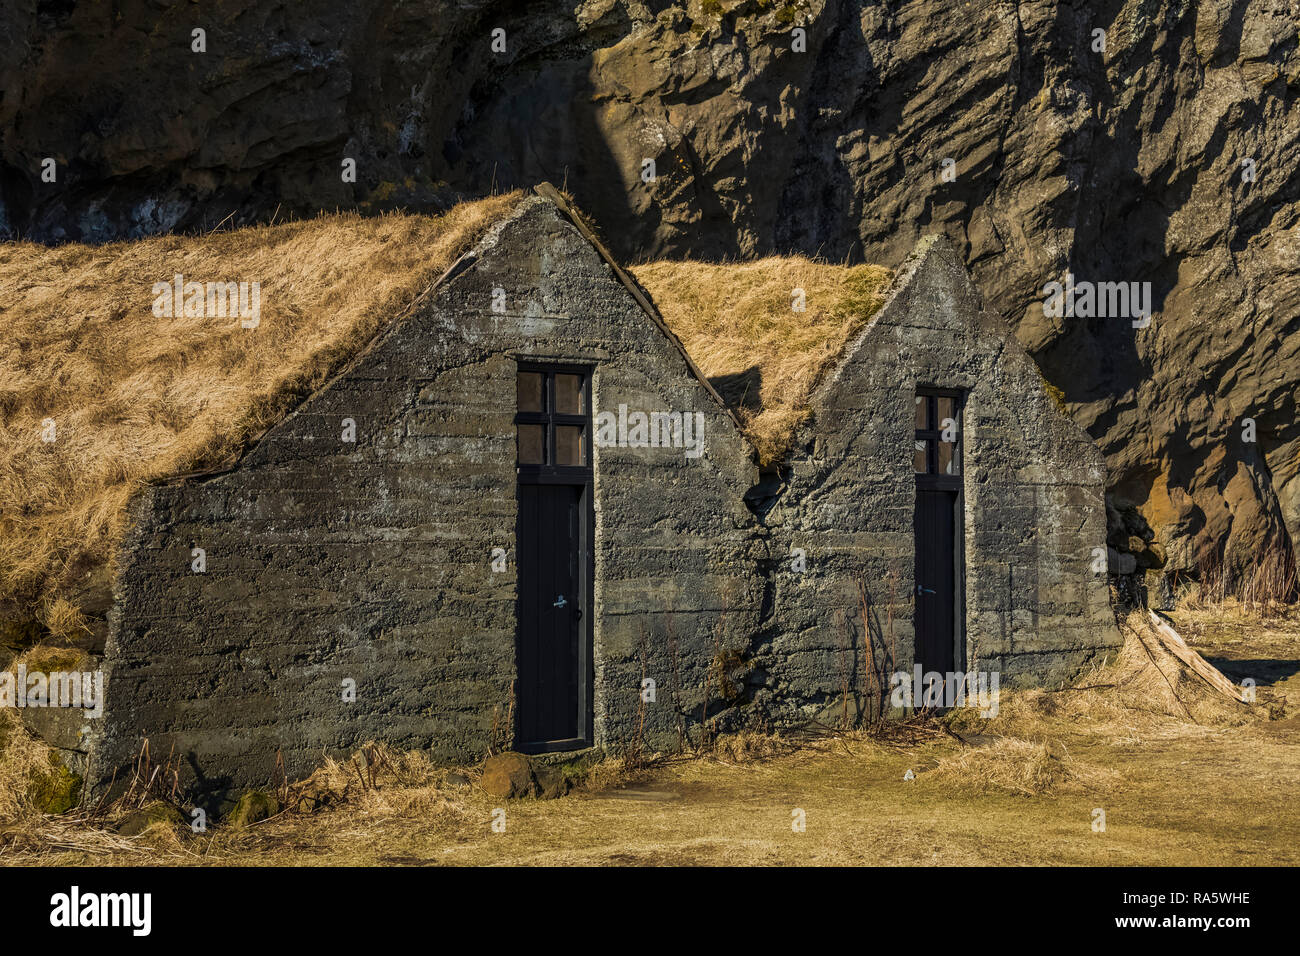 Concrete barns with sod roofs at Drangshlíð 2, at Drangurinn Rock, said to be home to elves, Iceland Stock Photo